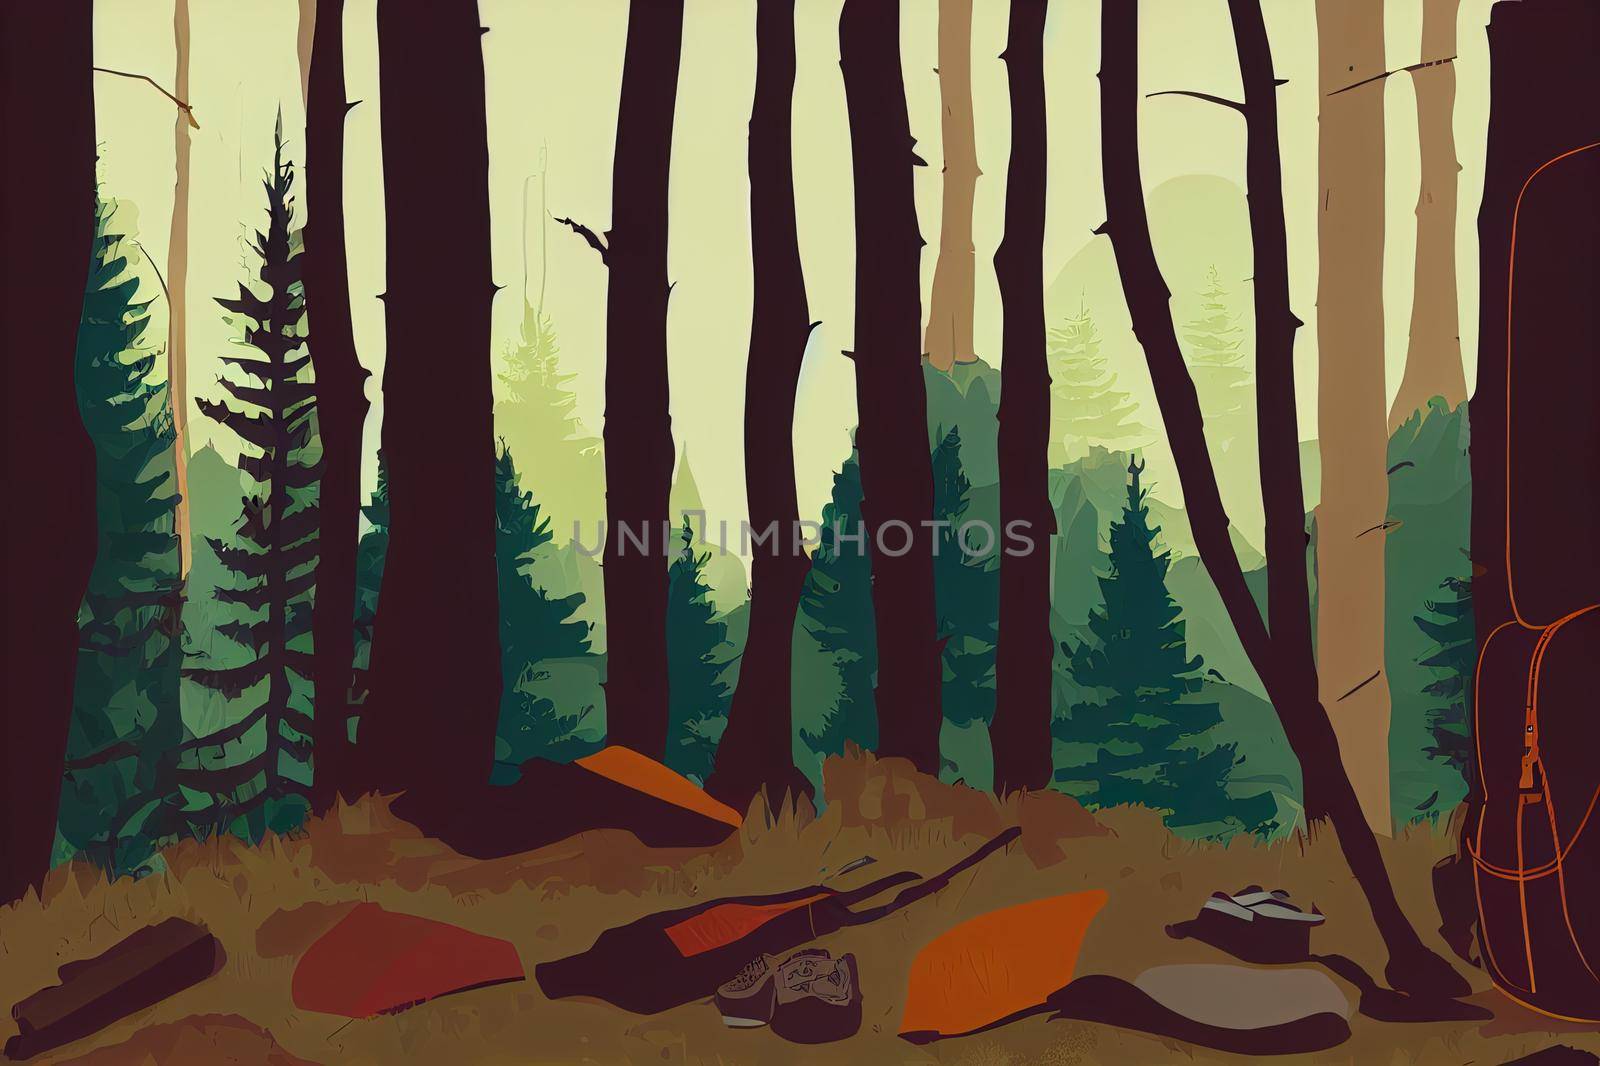 Hiking equipment in forest. Backpack and leather ankle boots. Panoramic view with copy space